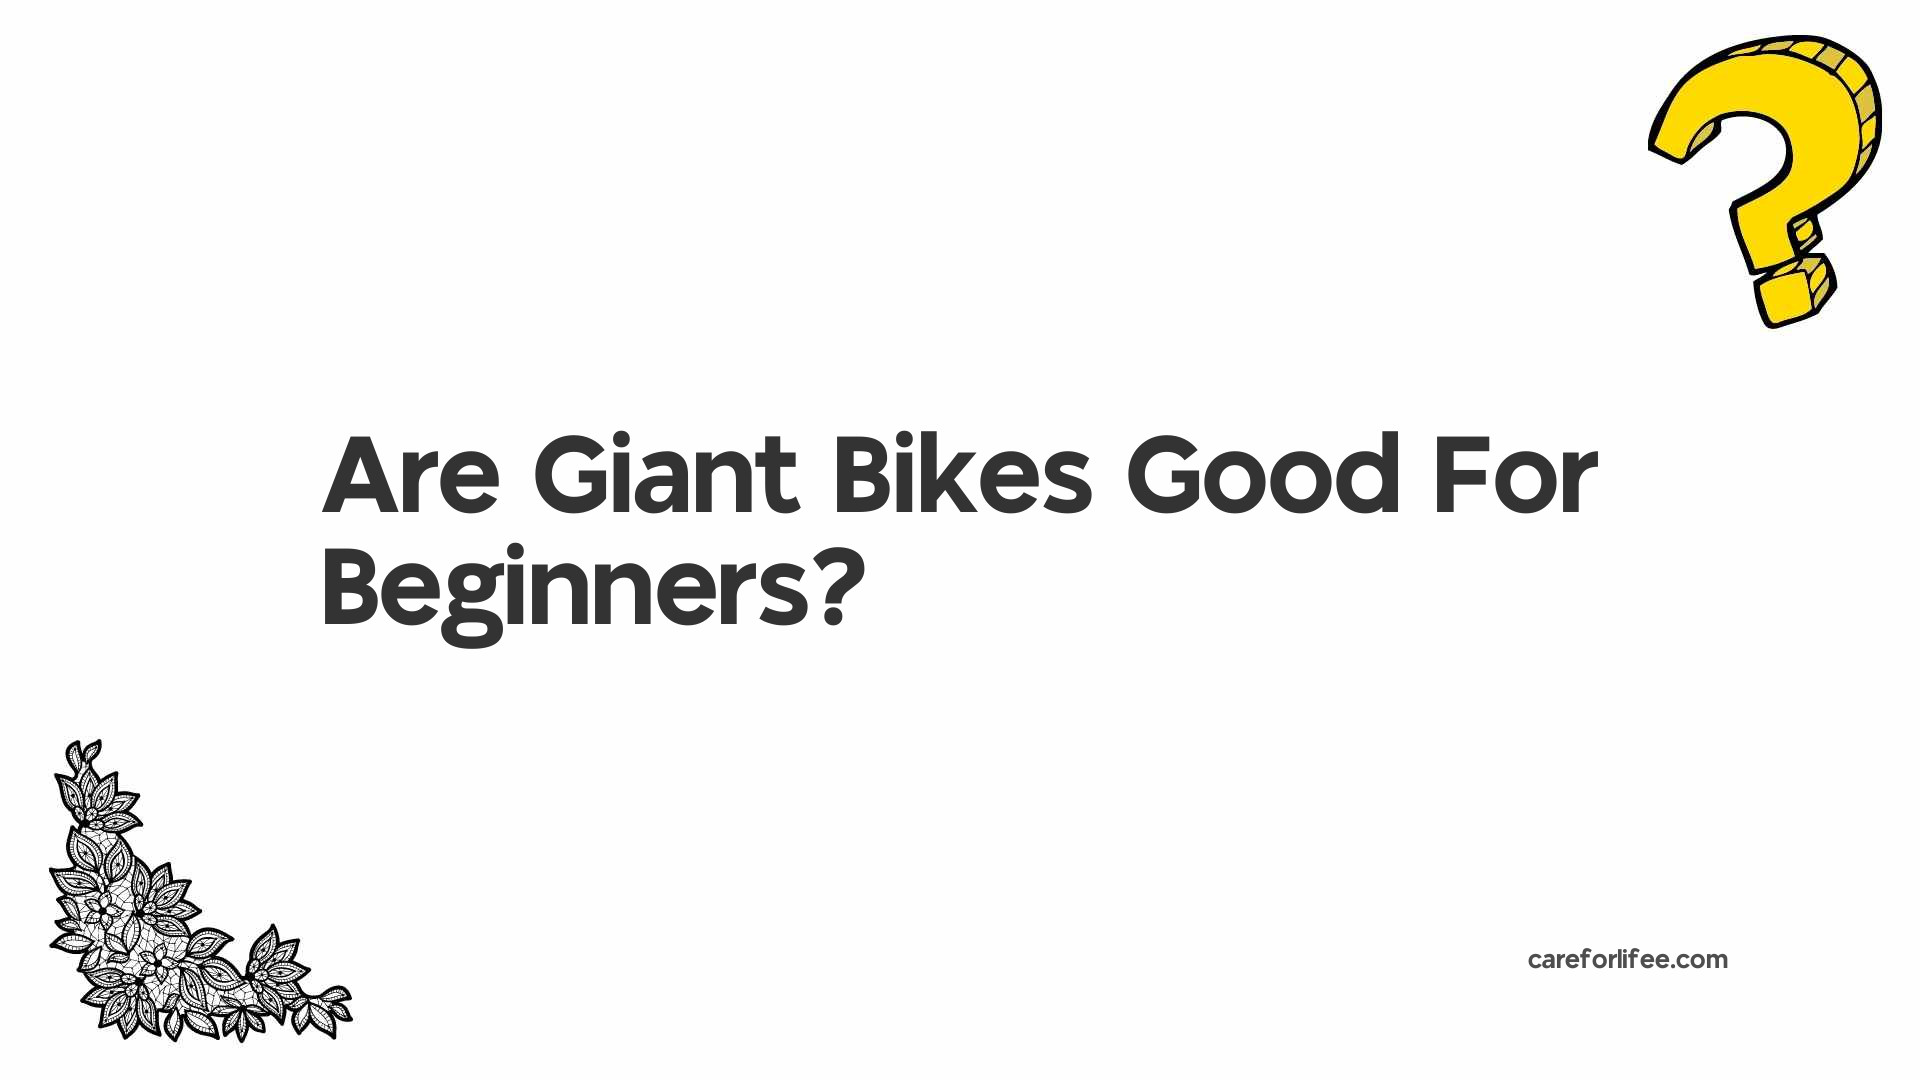 Are Giant Bikes Good For Beginners?